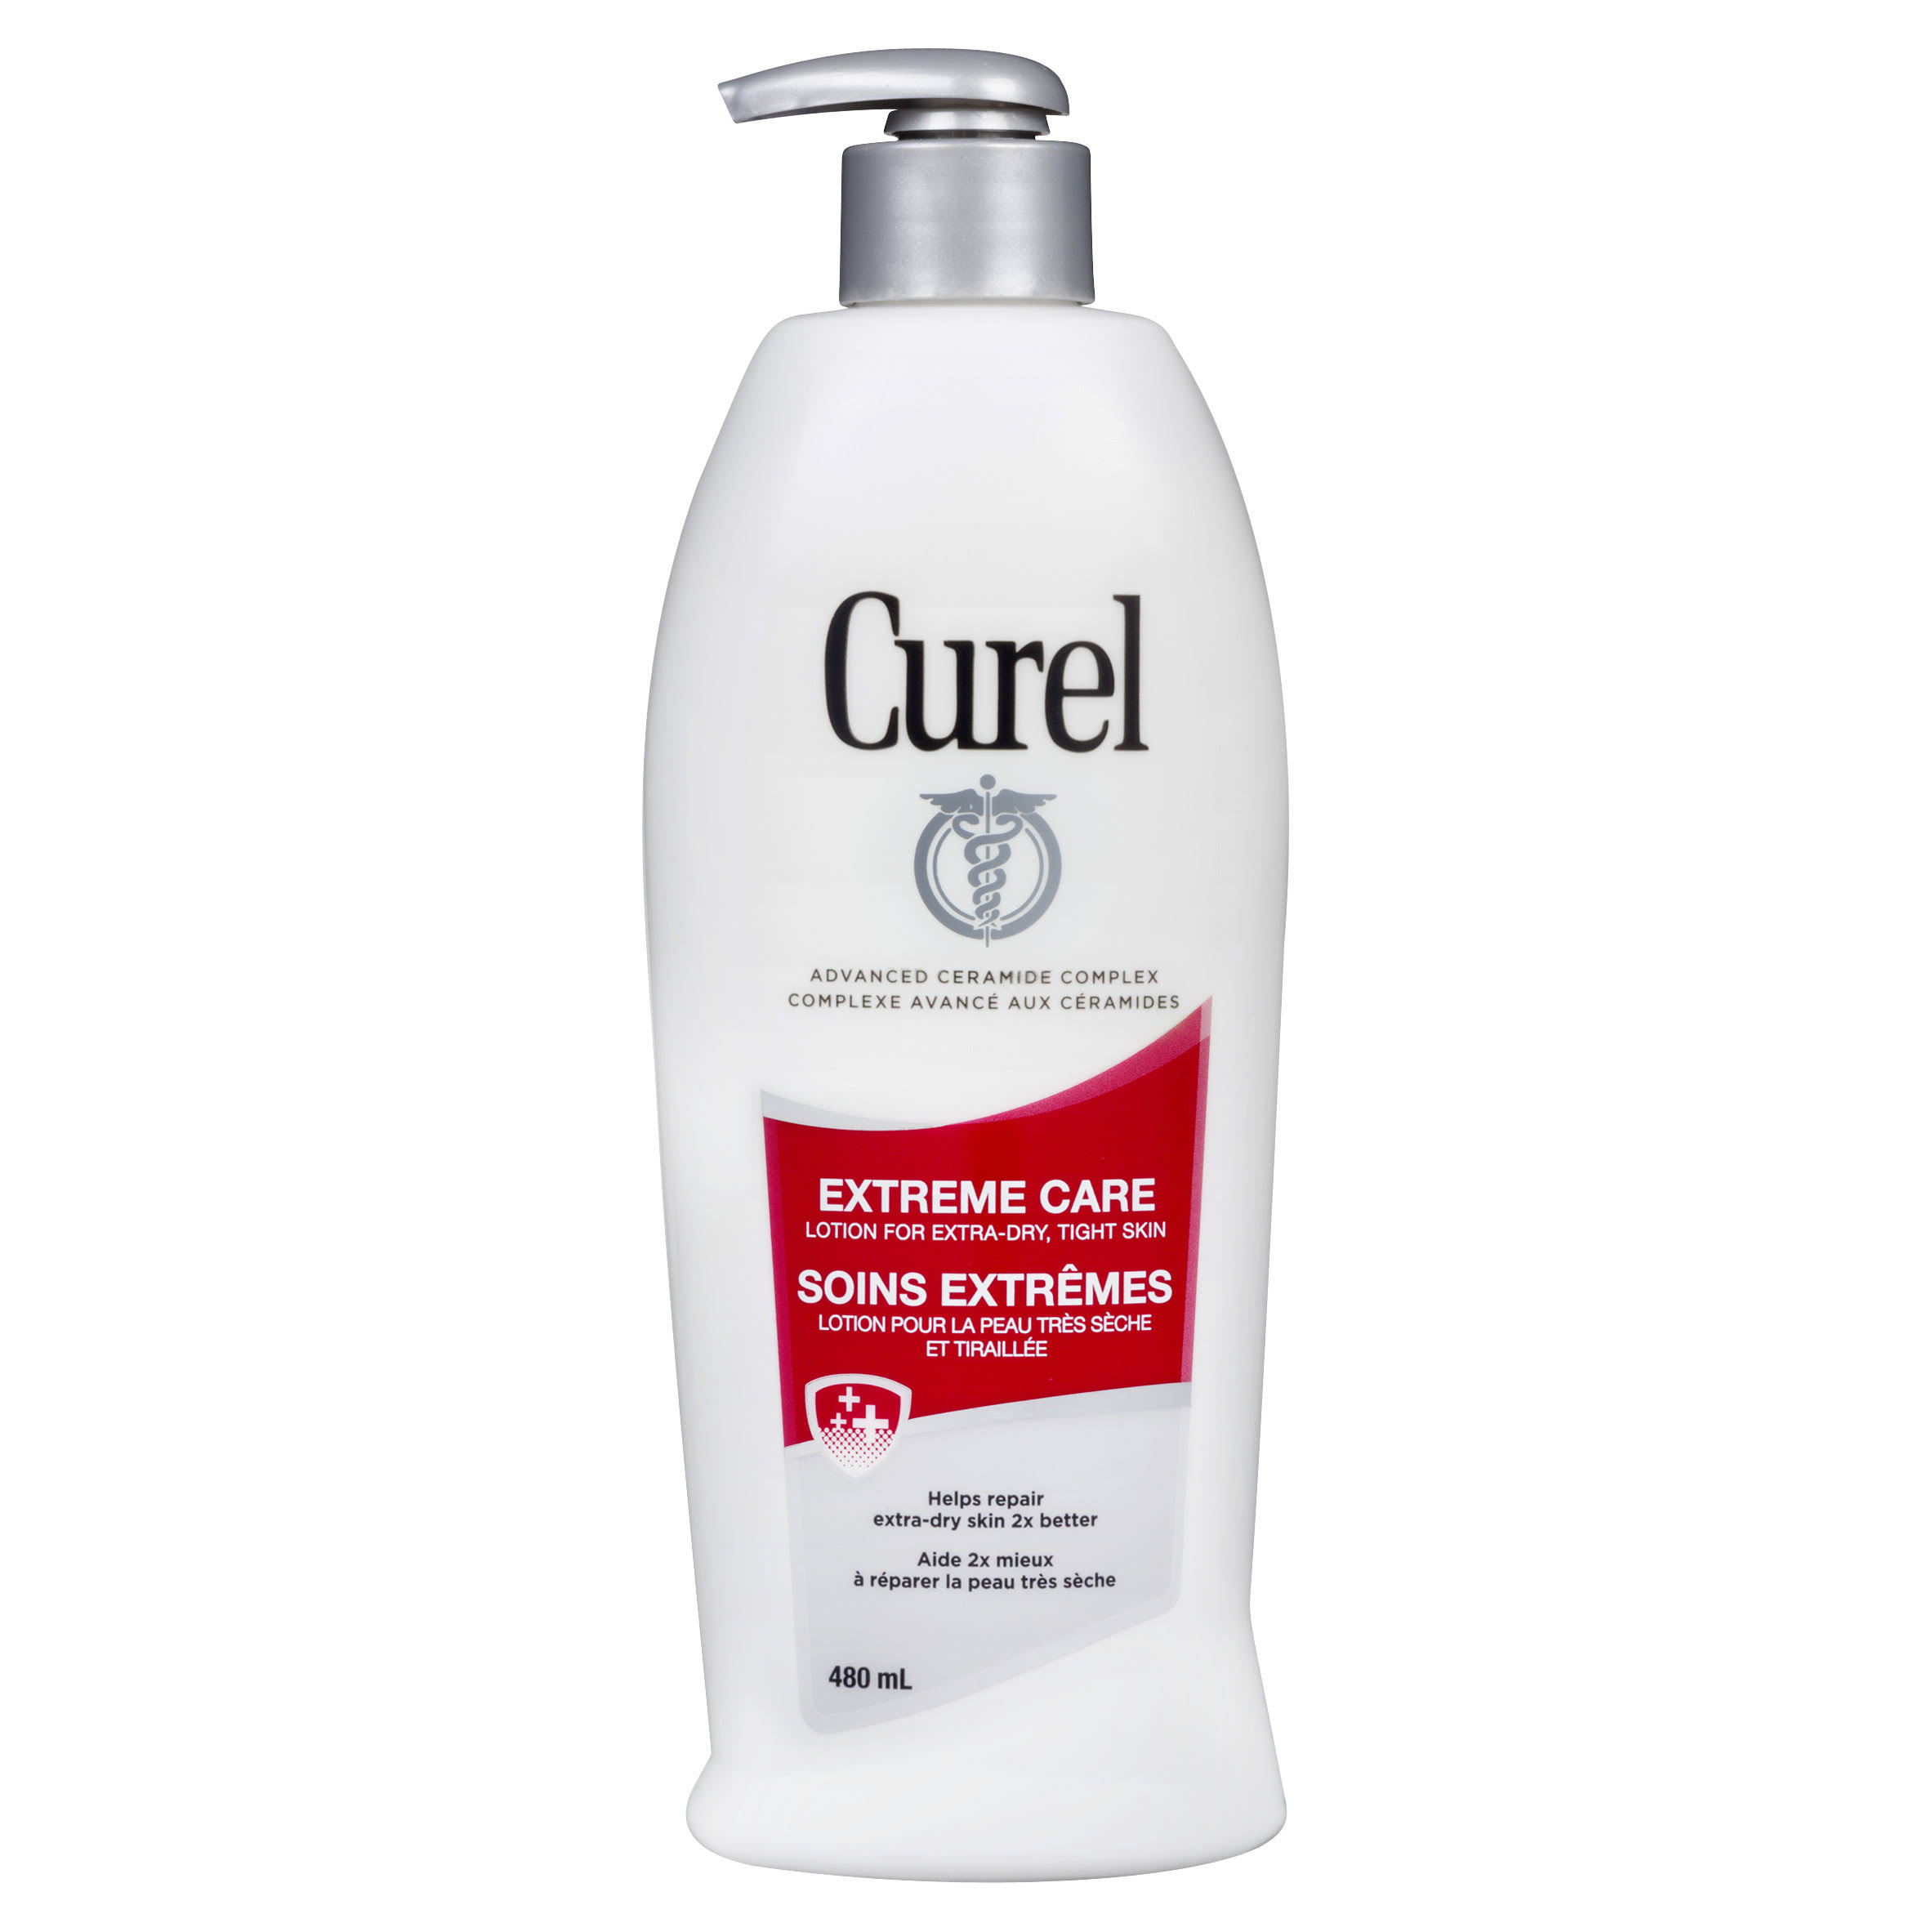 Curel Extreme Care Intensive Lotion For Extra Dry Skin - 480ml